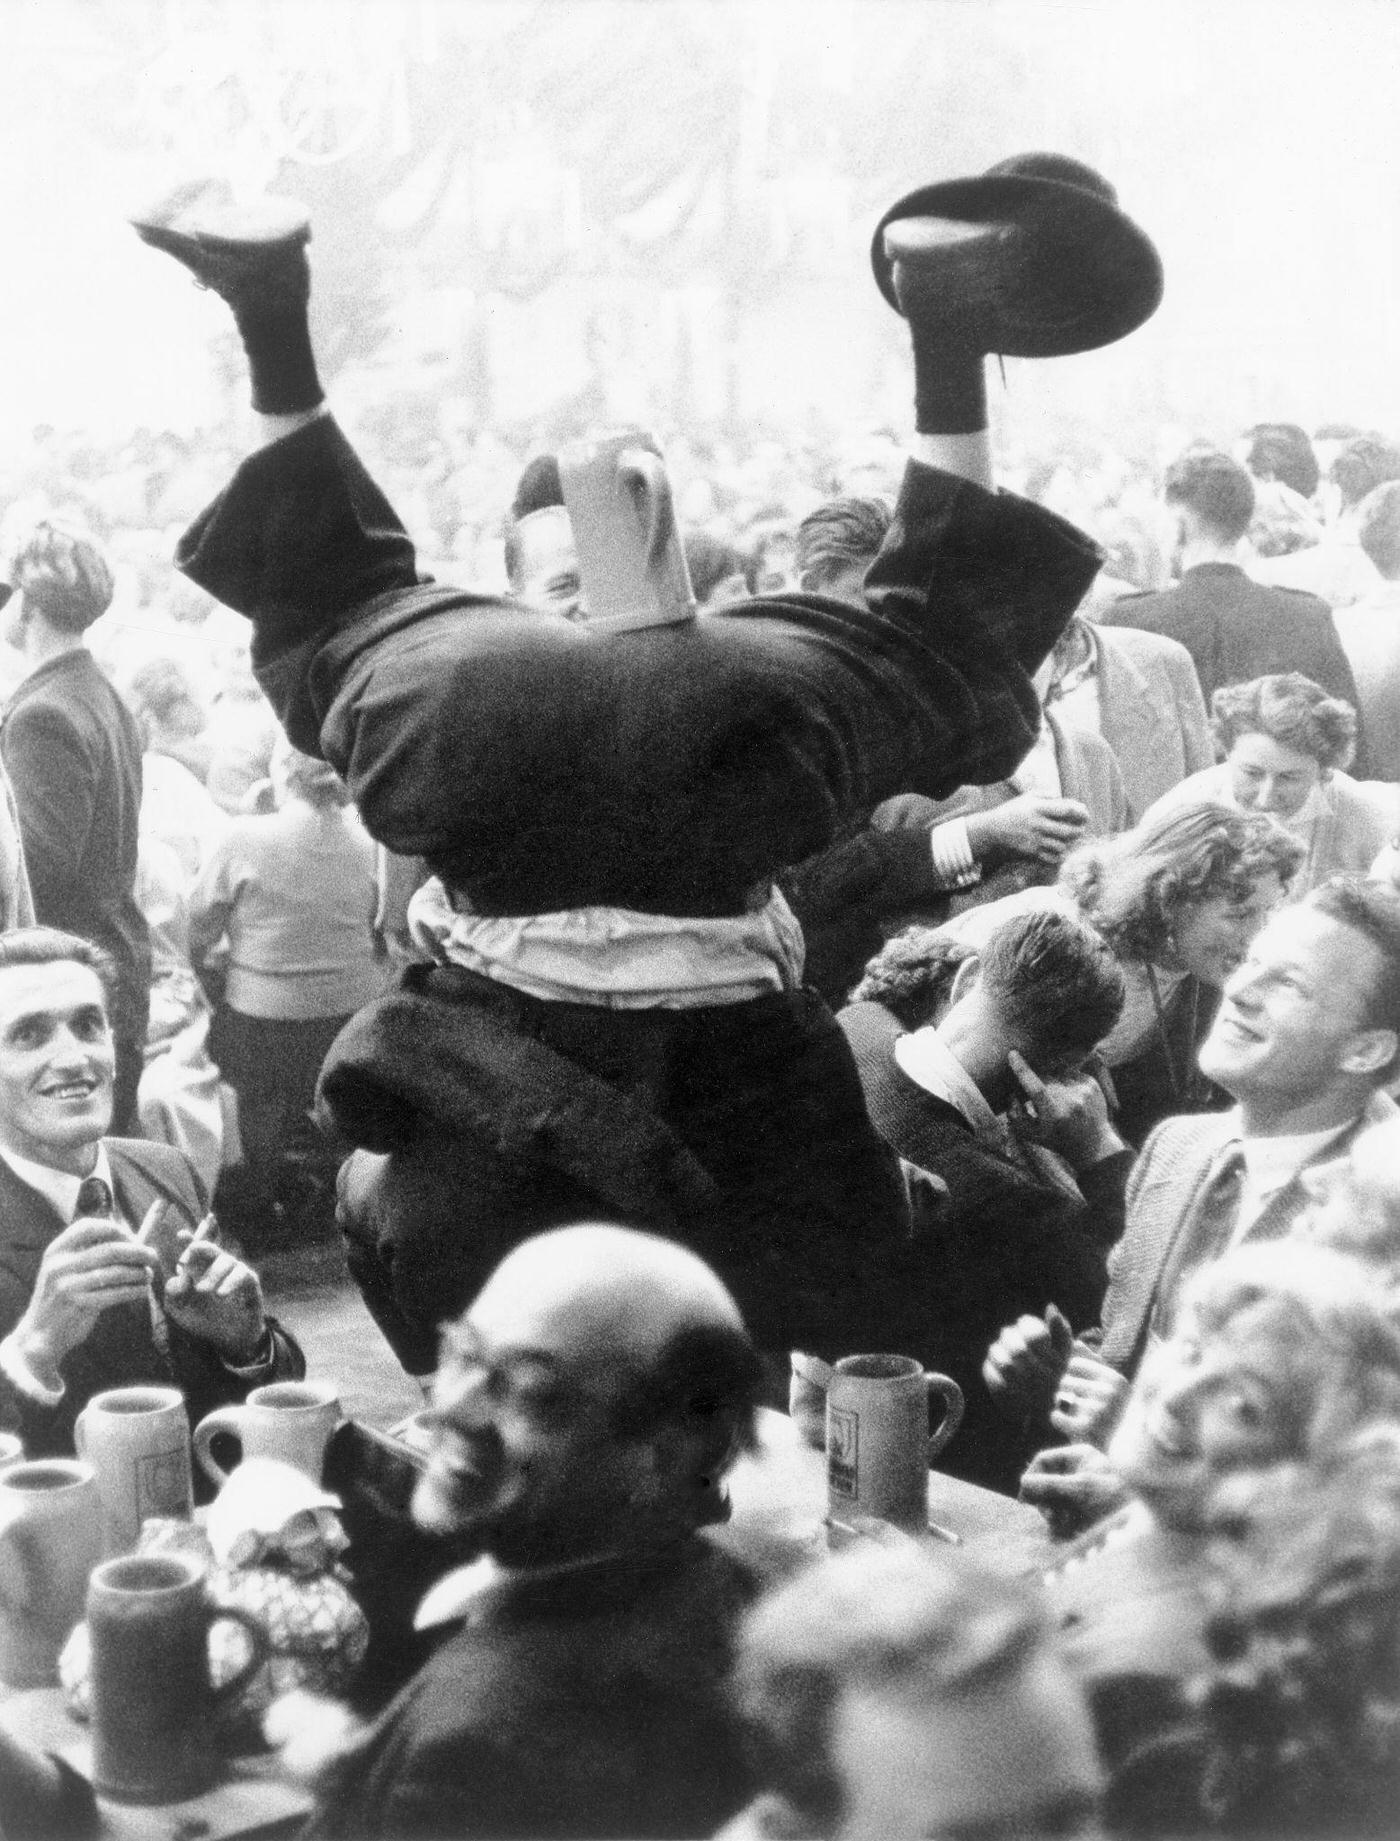 Oktoberfest headstand in a beer tent. 1968.